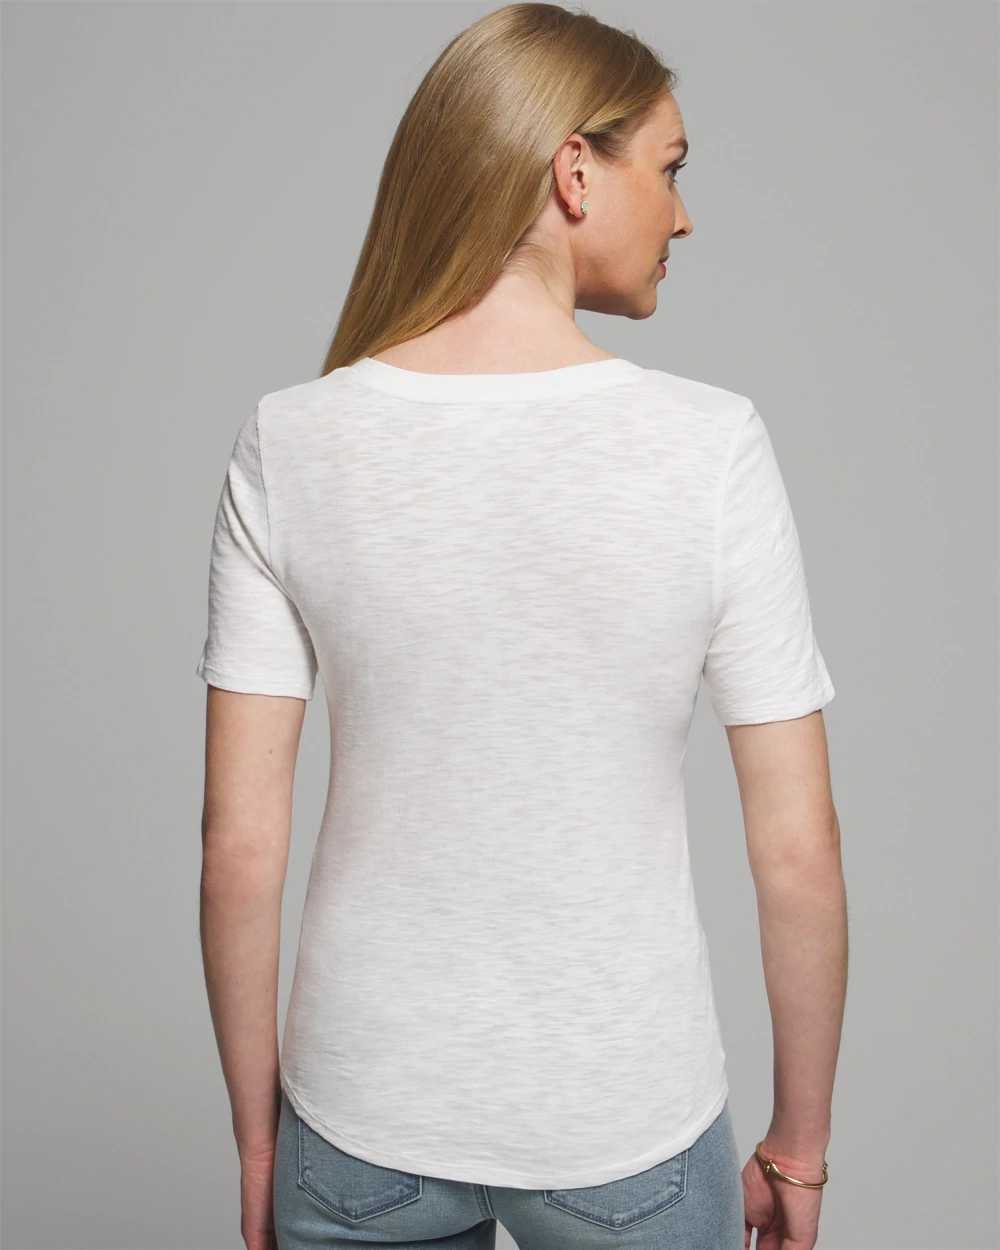 Outlet WHBM Short Sleeve V-Neck Foundation Tee click to view larger image.